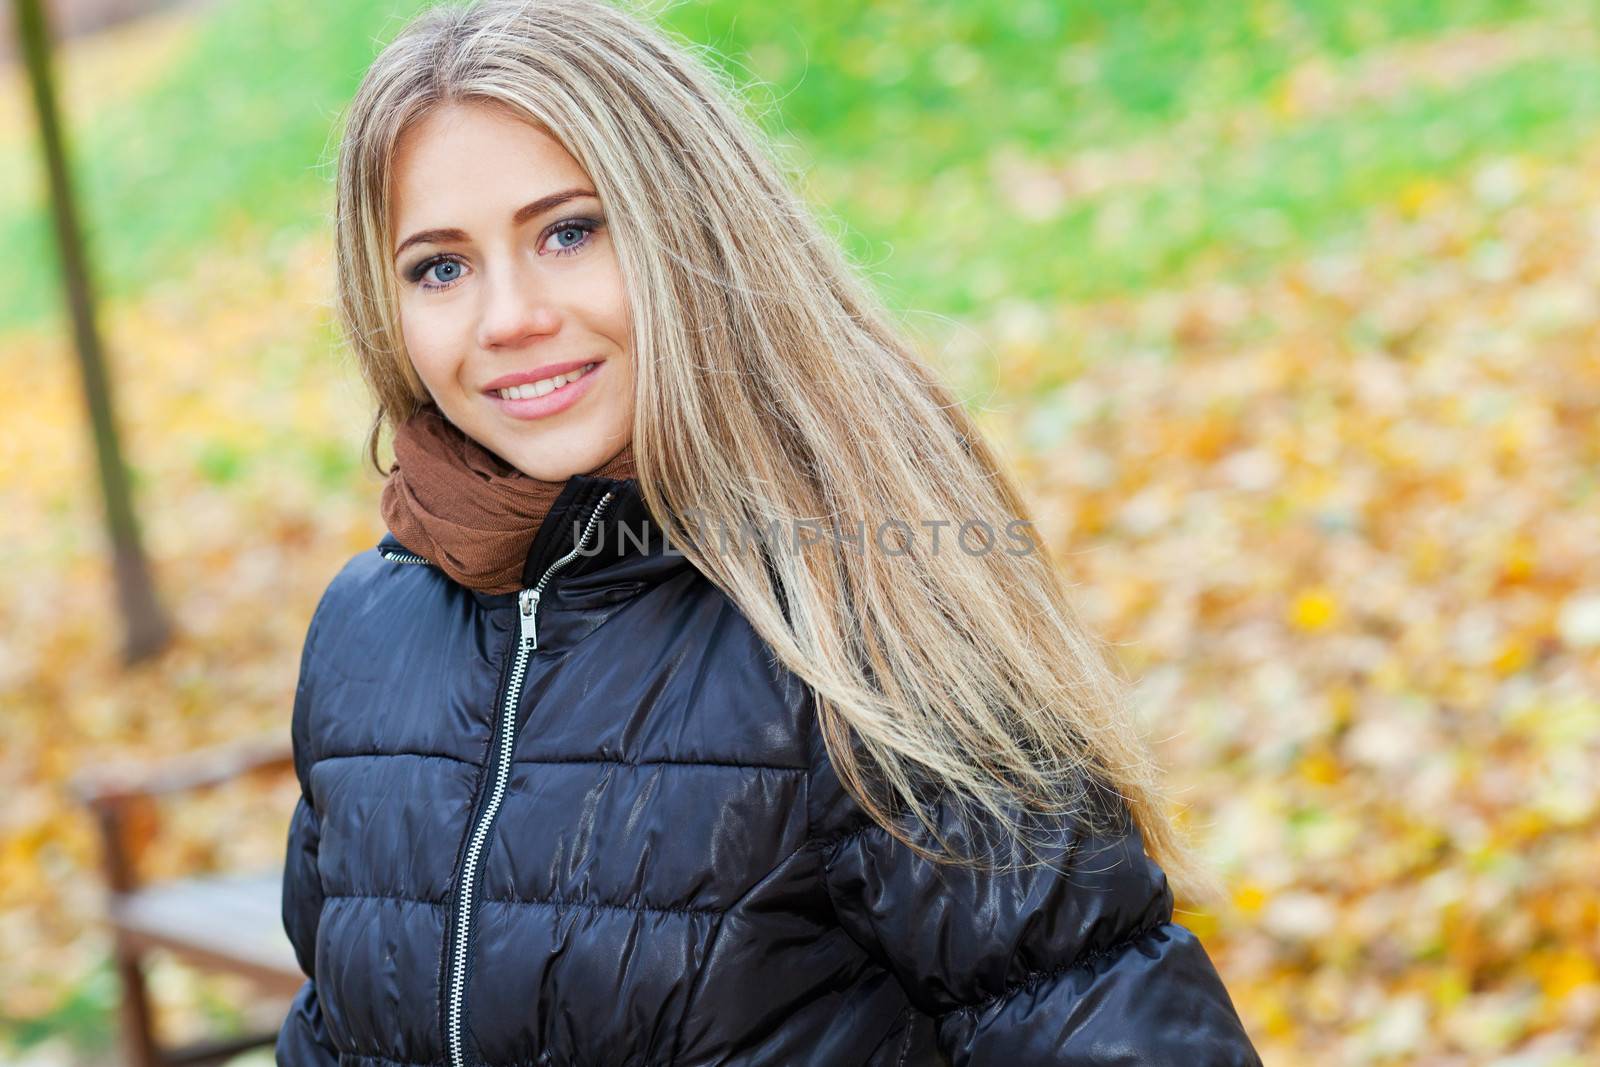 Young blond woman in autumn by TristanBM